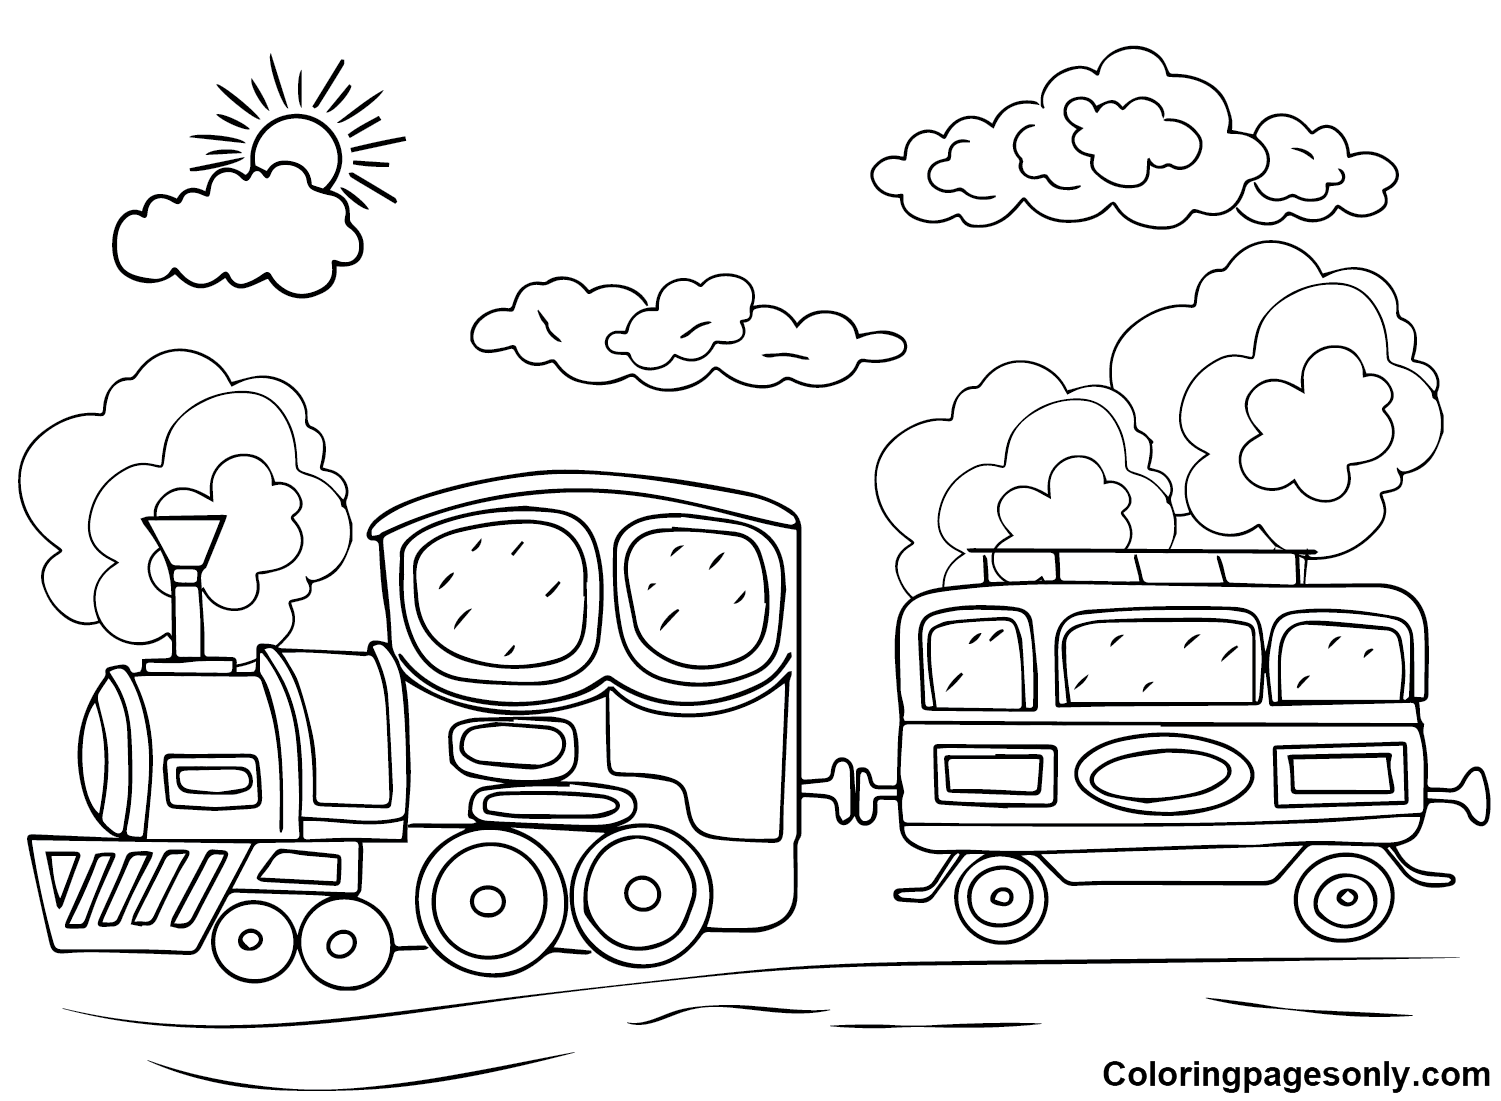 Train Images Coloring Page